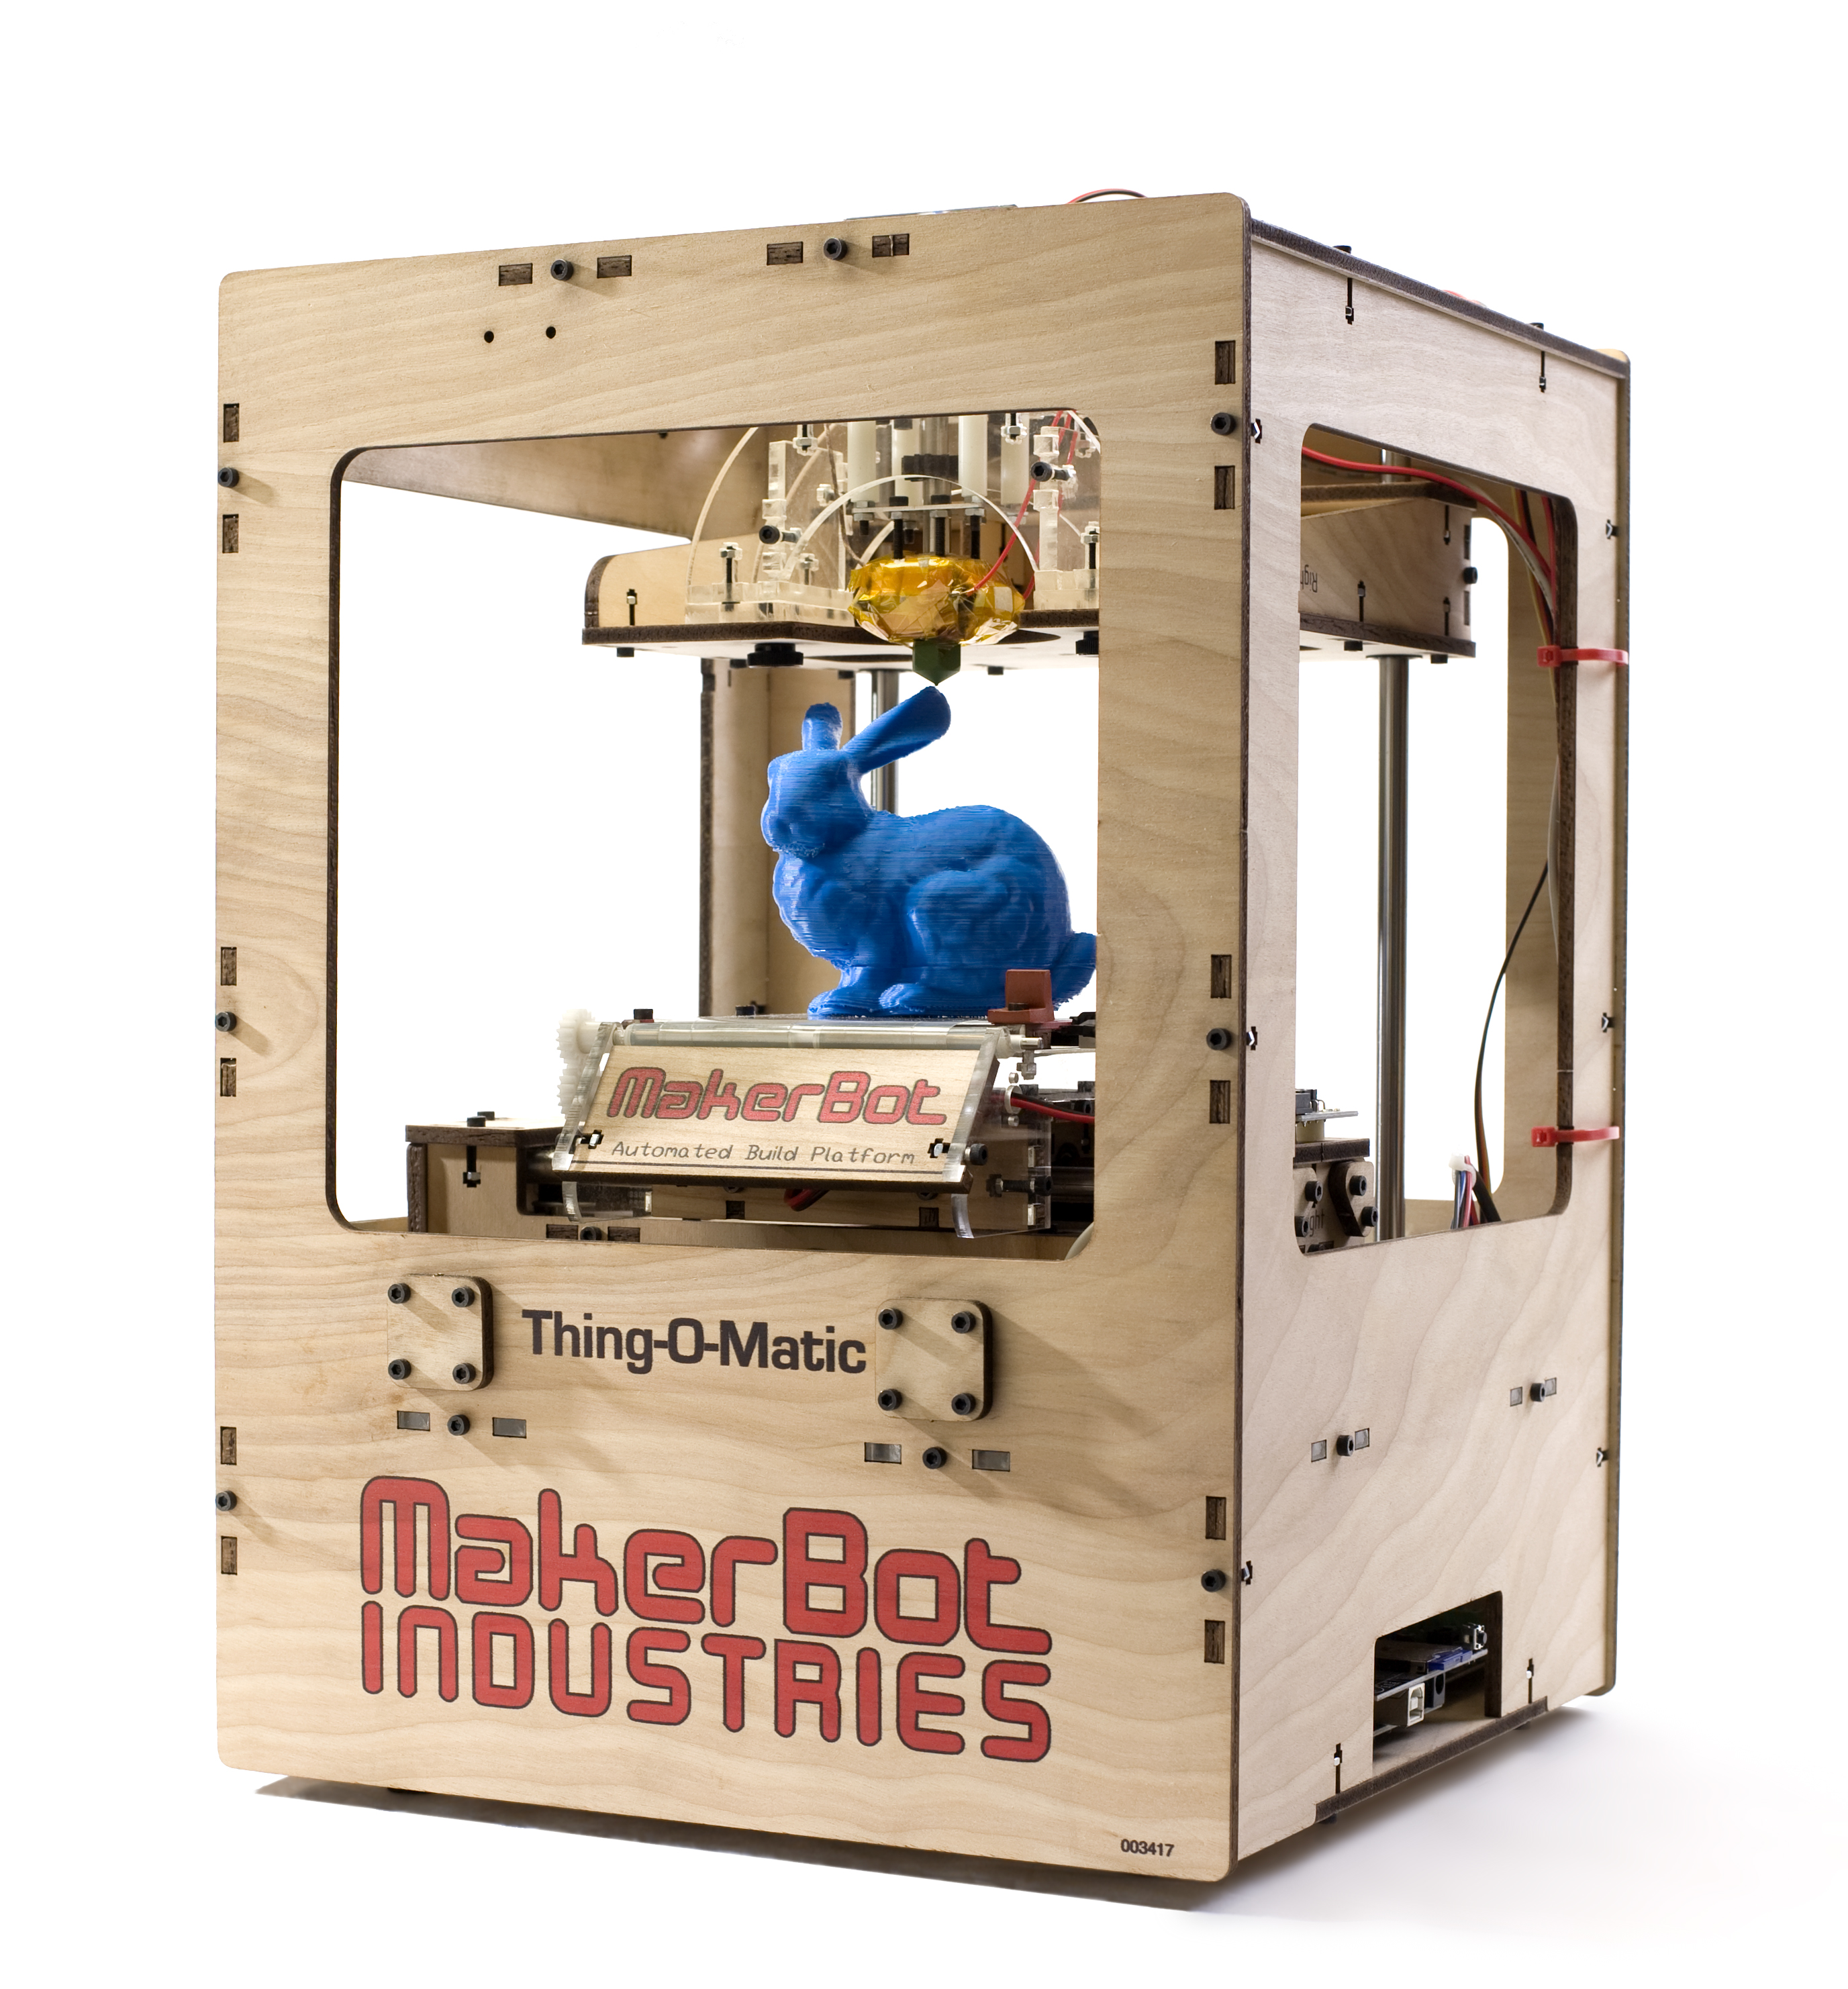 MakerBot Industries - Wikipedia, the free encyclopedia